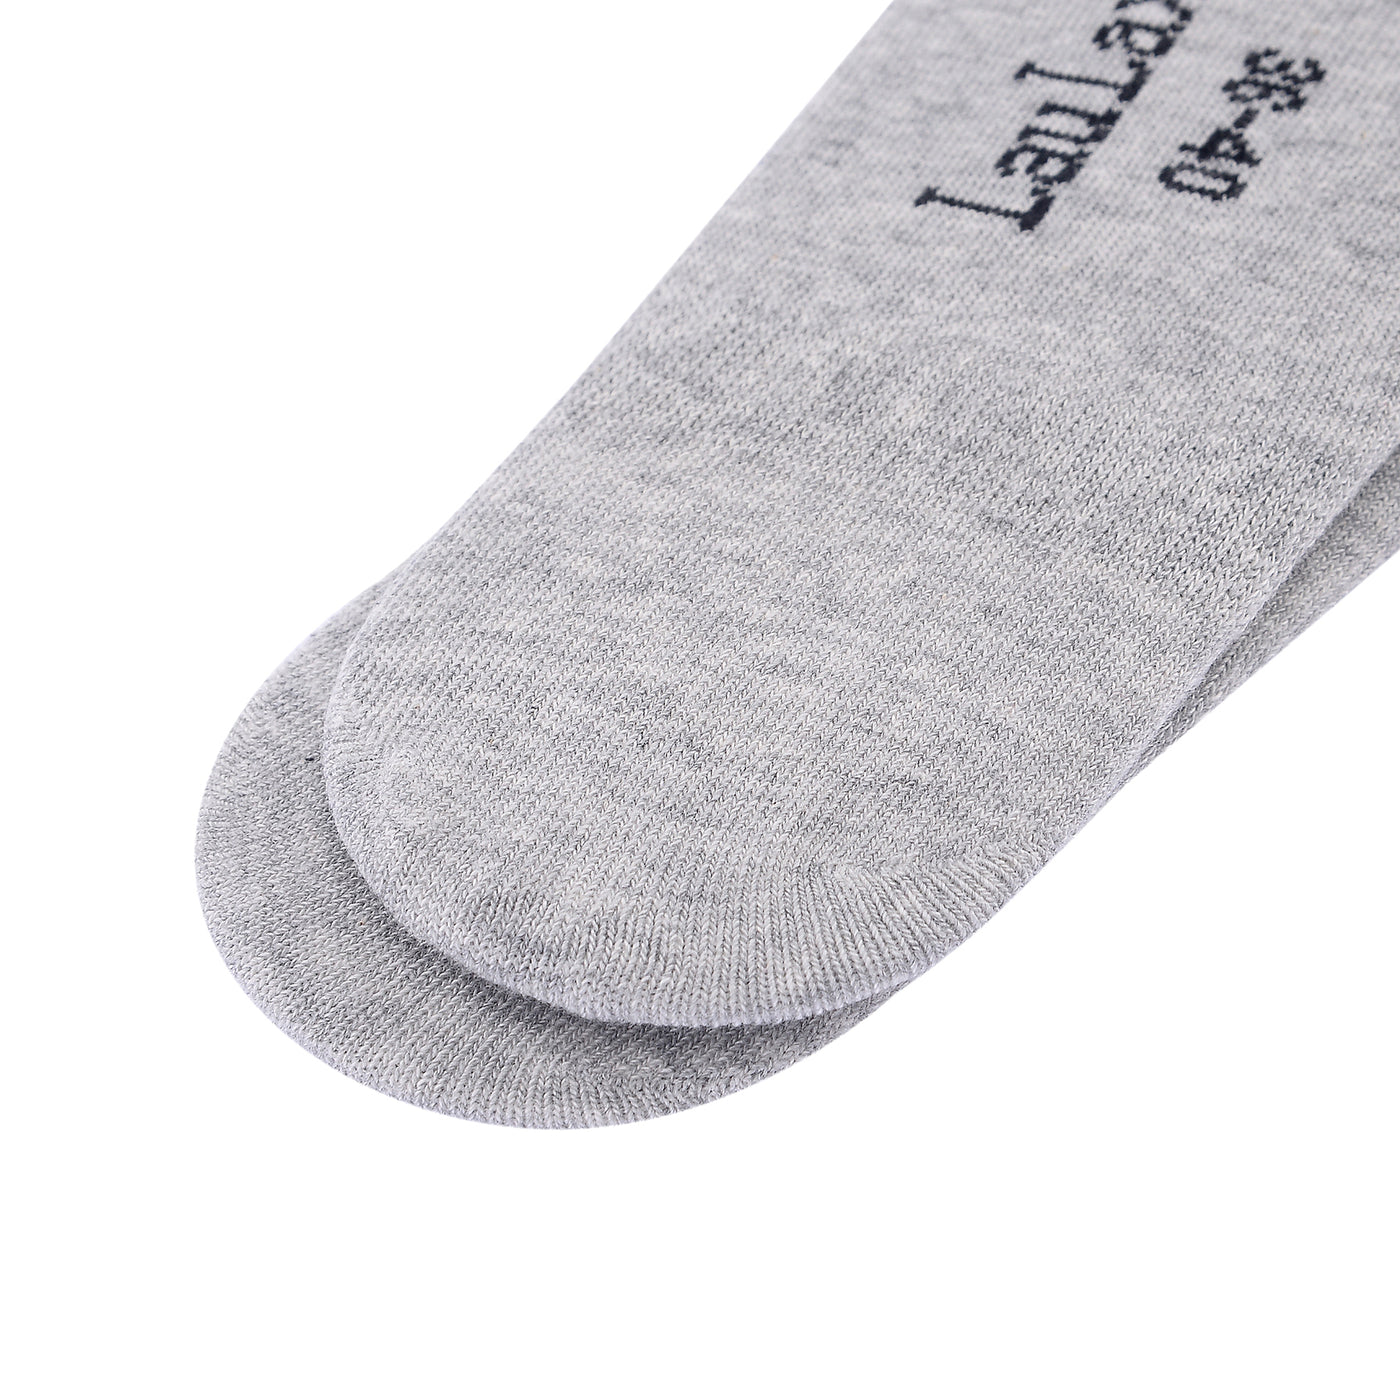 Laulax 2 Pairs Finest Combed Cotton Invisible Socks Plain - Grey